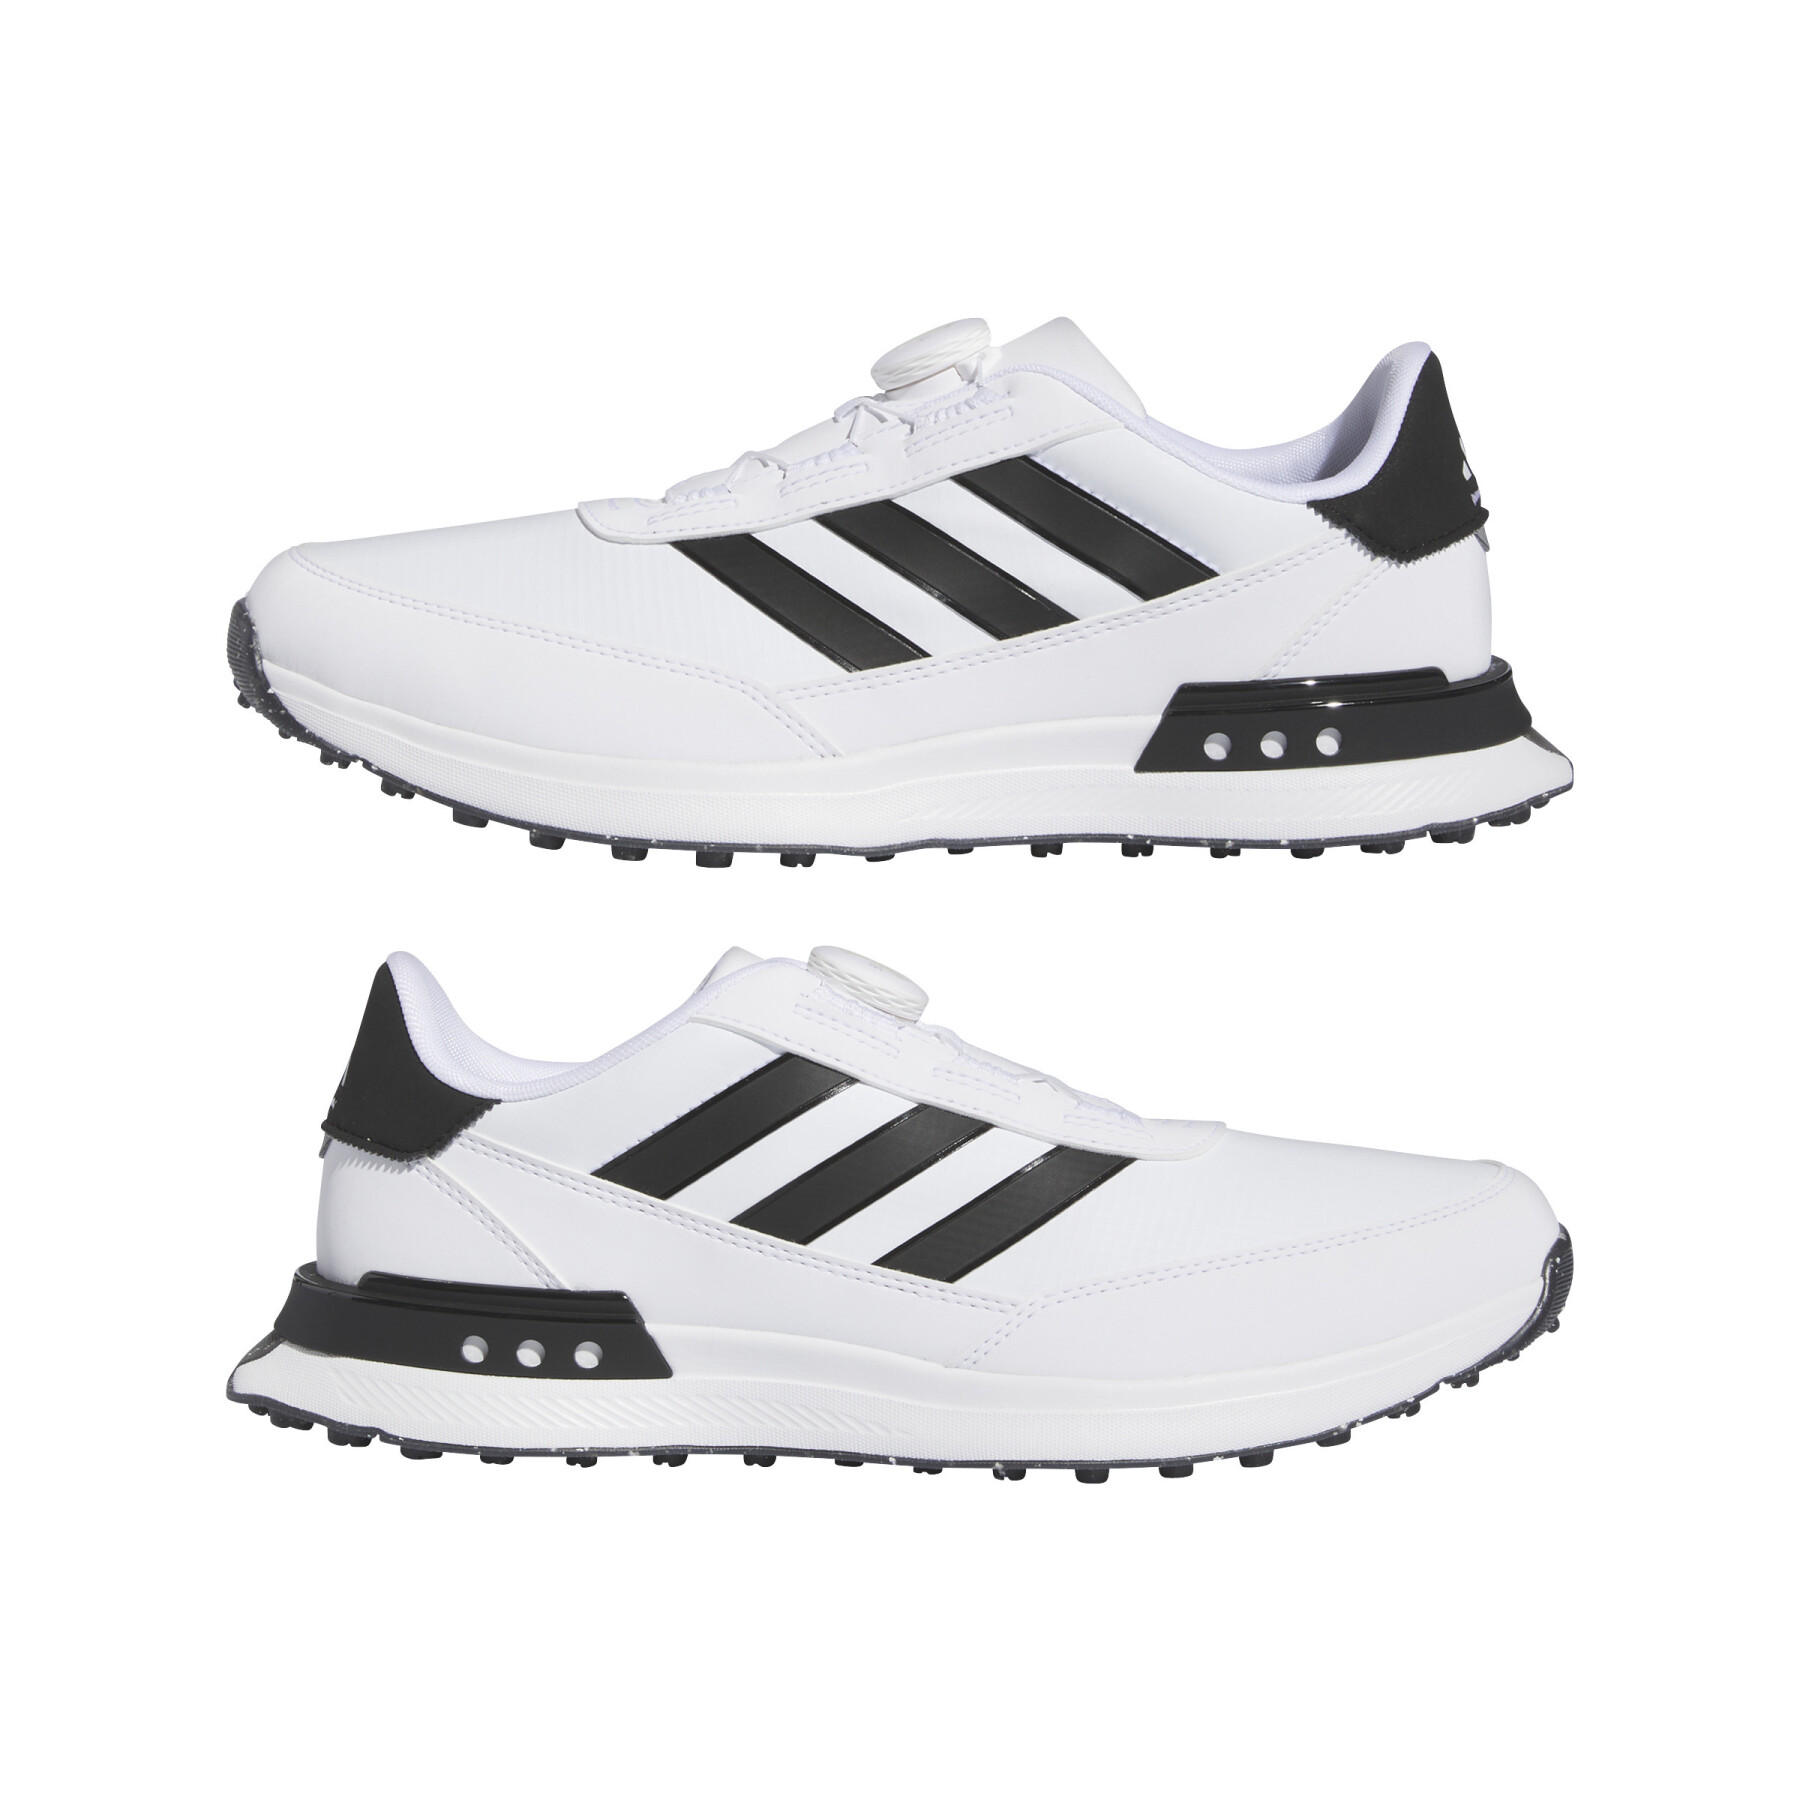 Spikeless golf shoes adidas S2G BOA 24 Wide